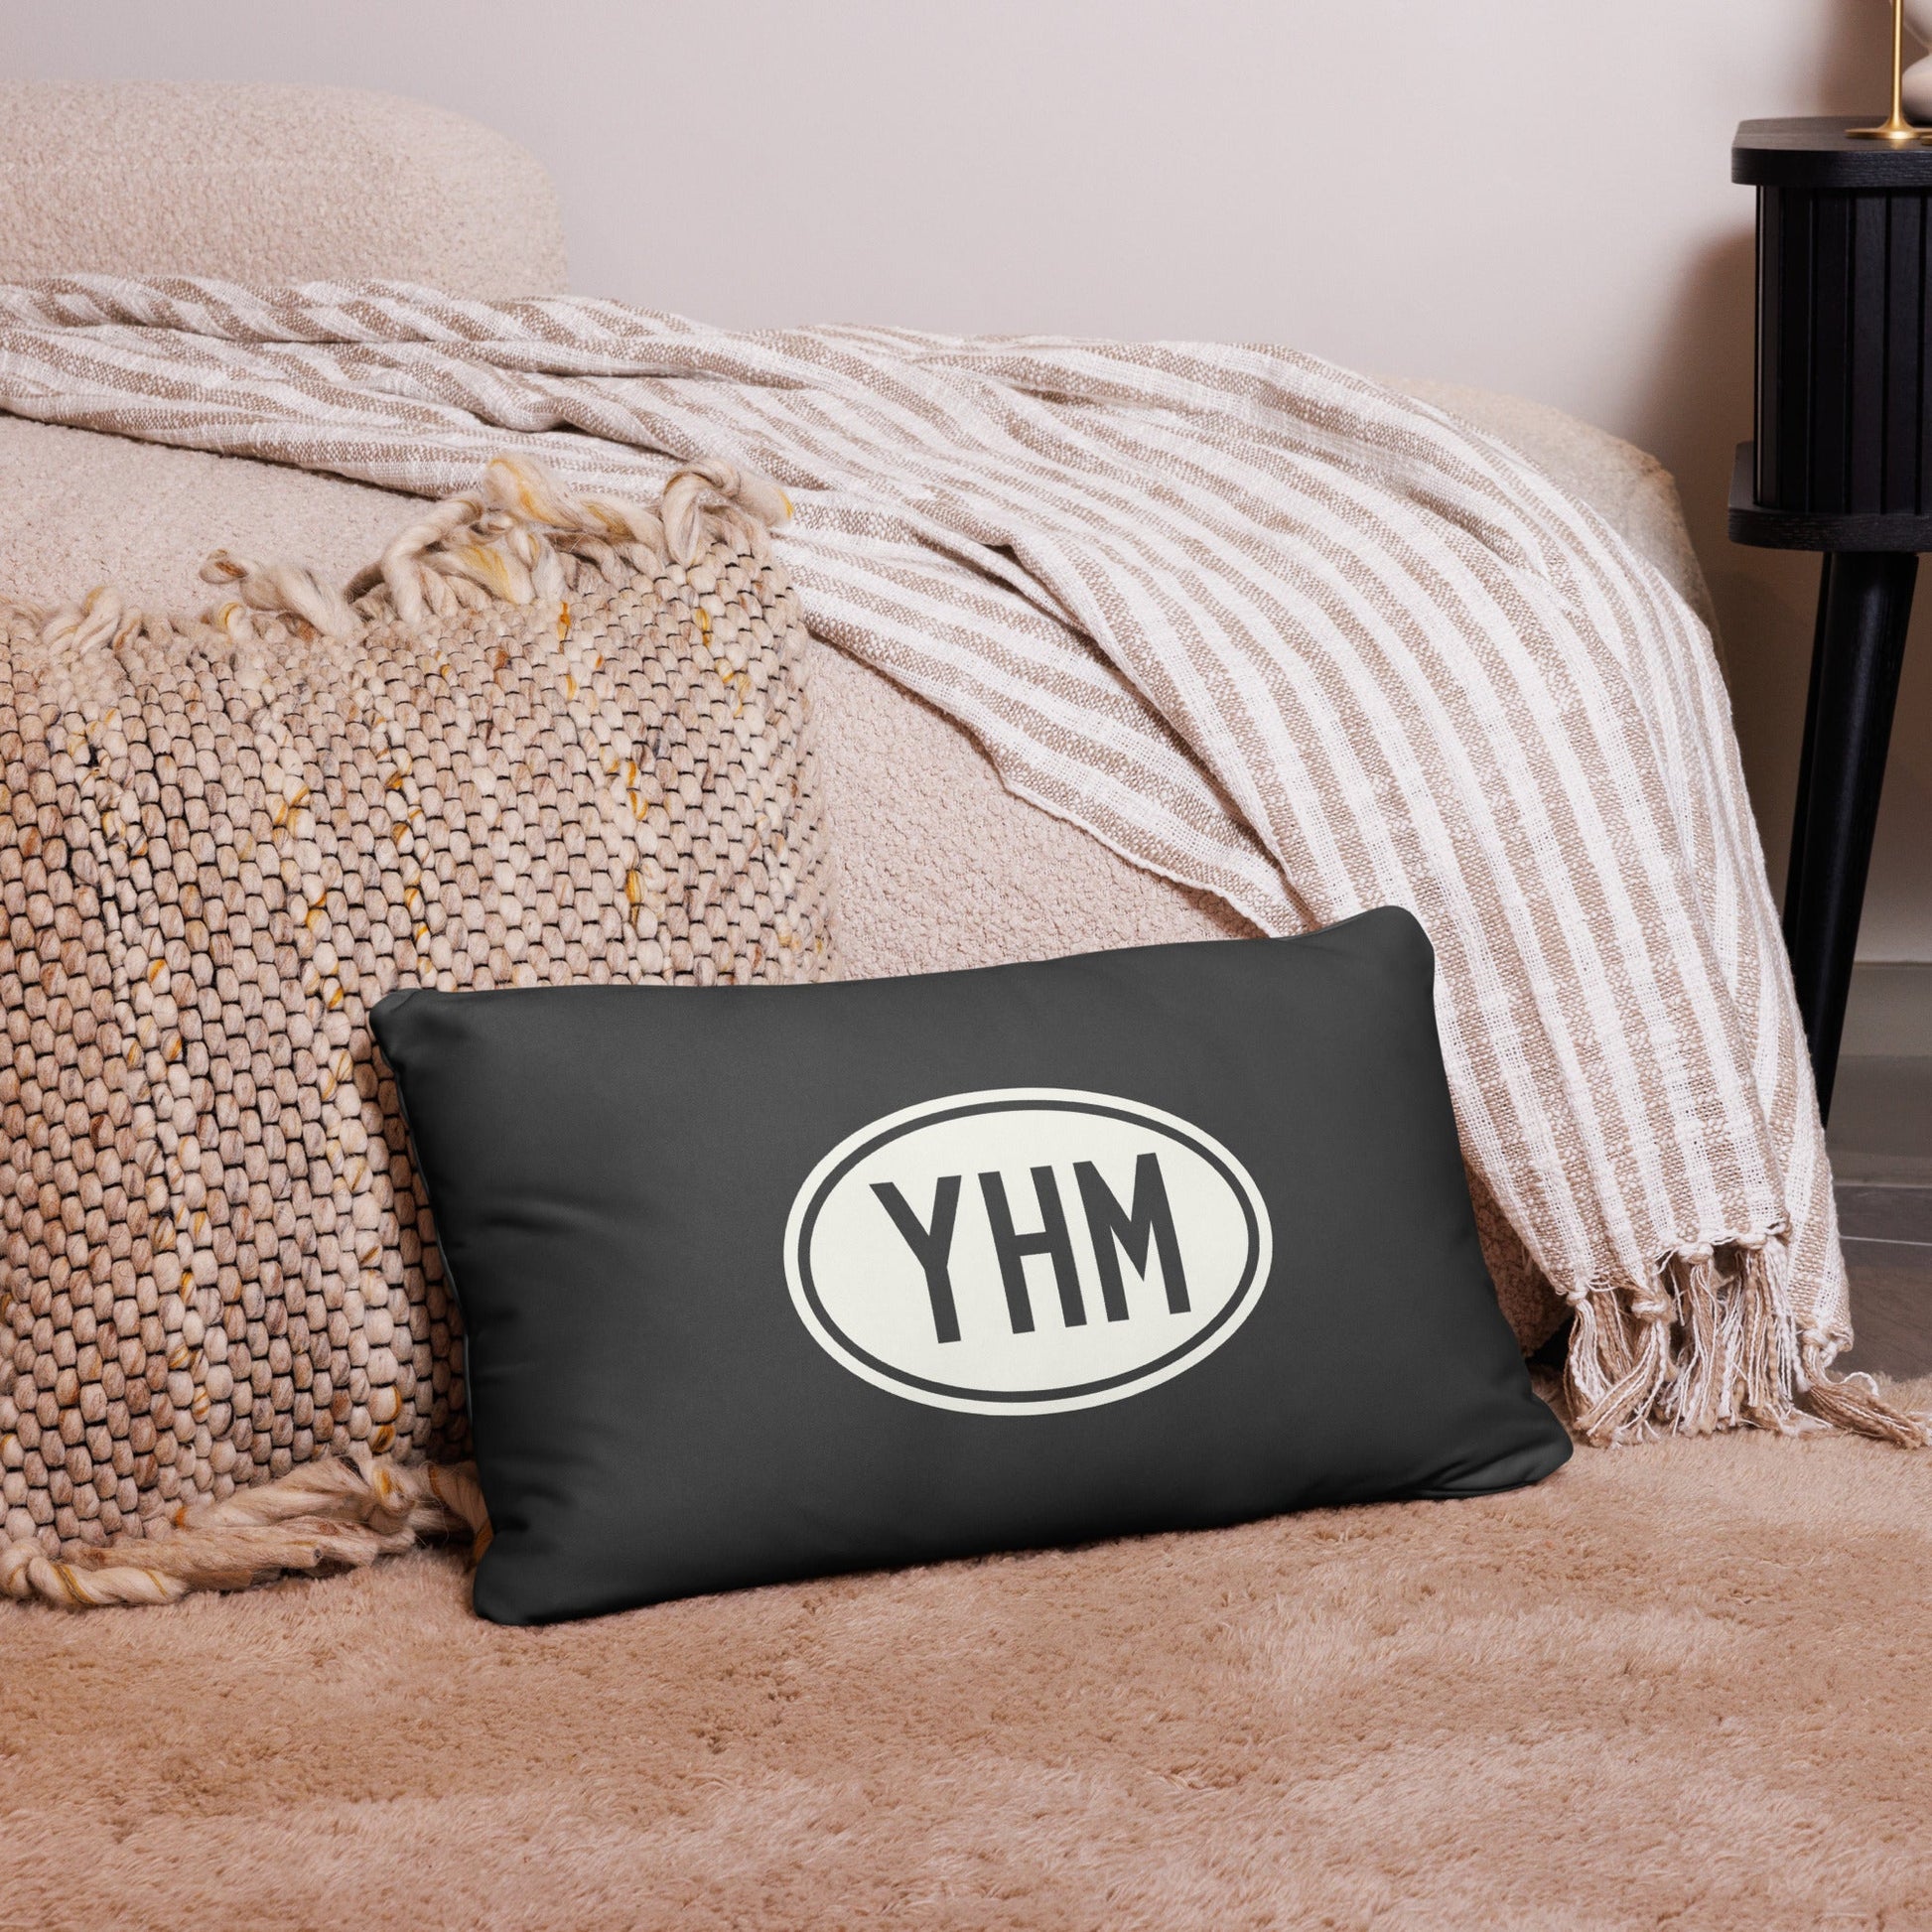 Unique Travel Gift Throw Pillow - White Oval • YVR Vancouver • YHM Designs - Image 05